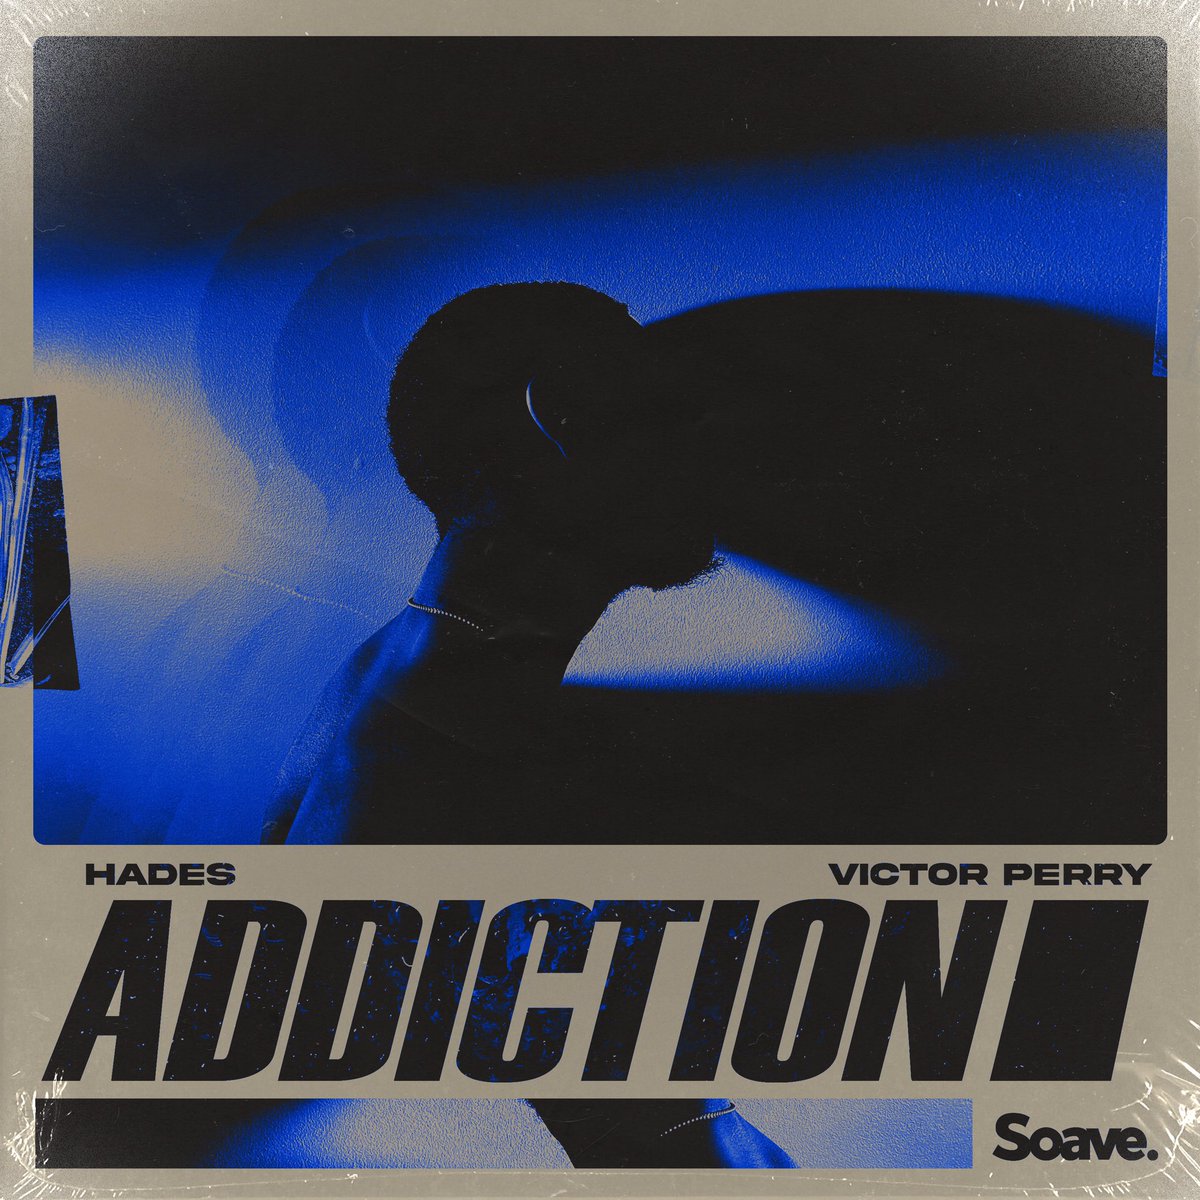 Peep the official single cover for “Addiction” produced by @hadesmmusic. Out 5/27 over at @soaverecords. 💙 Pre-save here: push.fm/ps/addiction